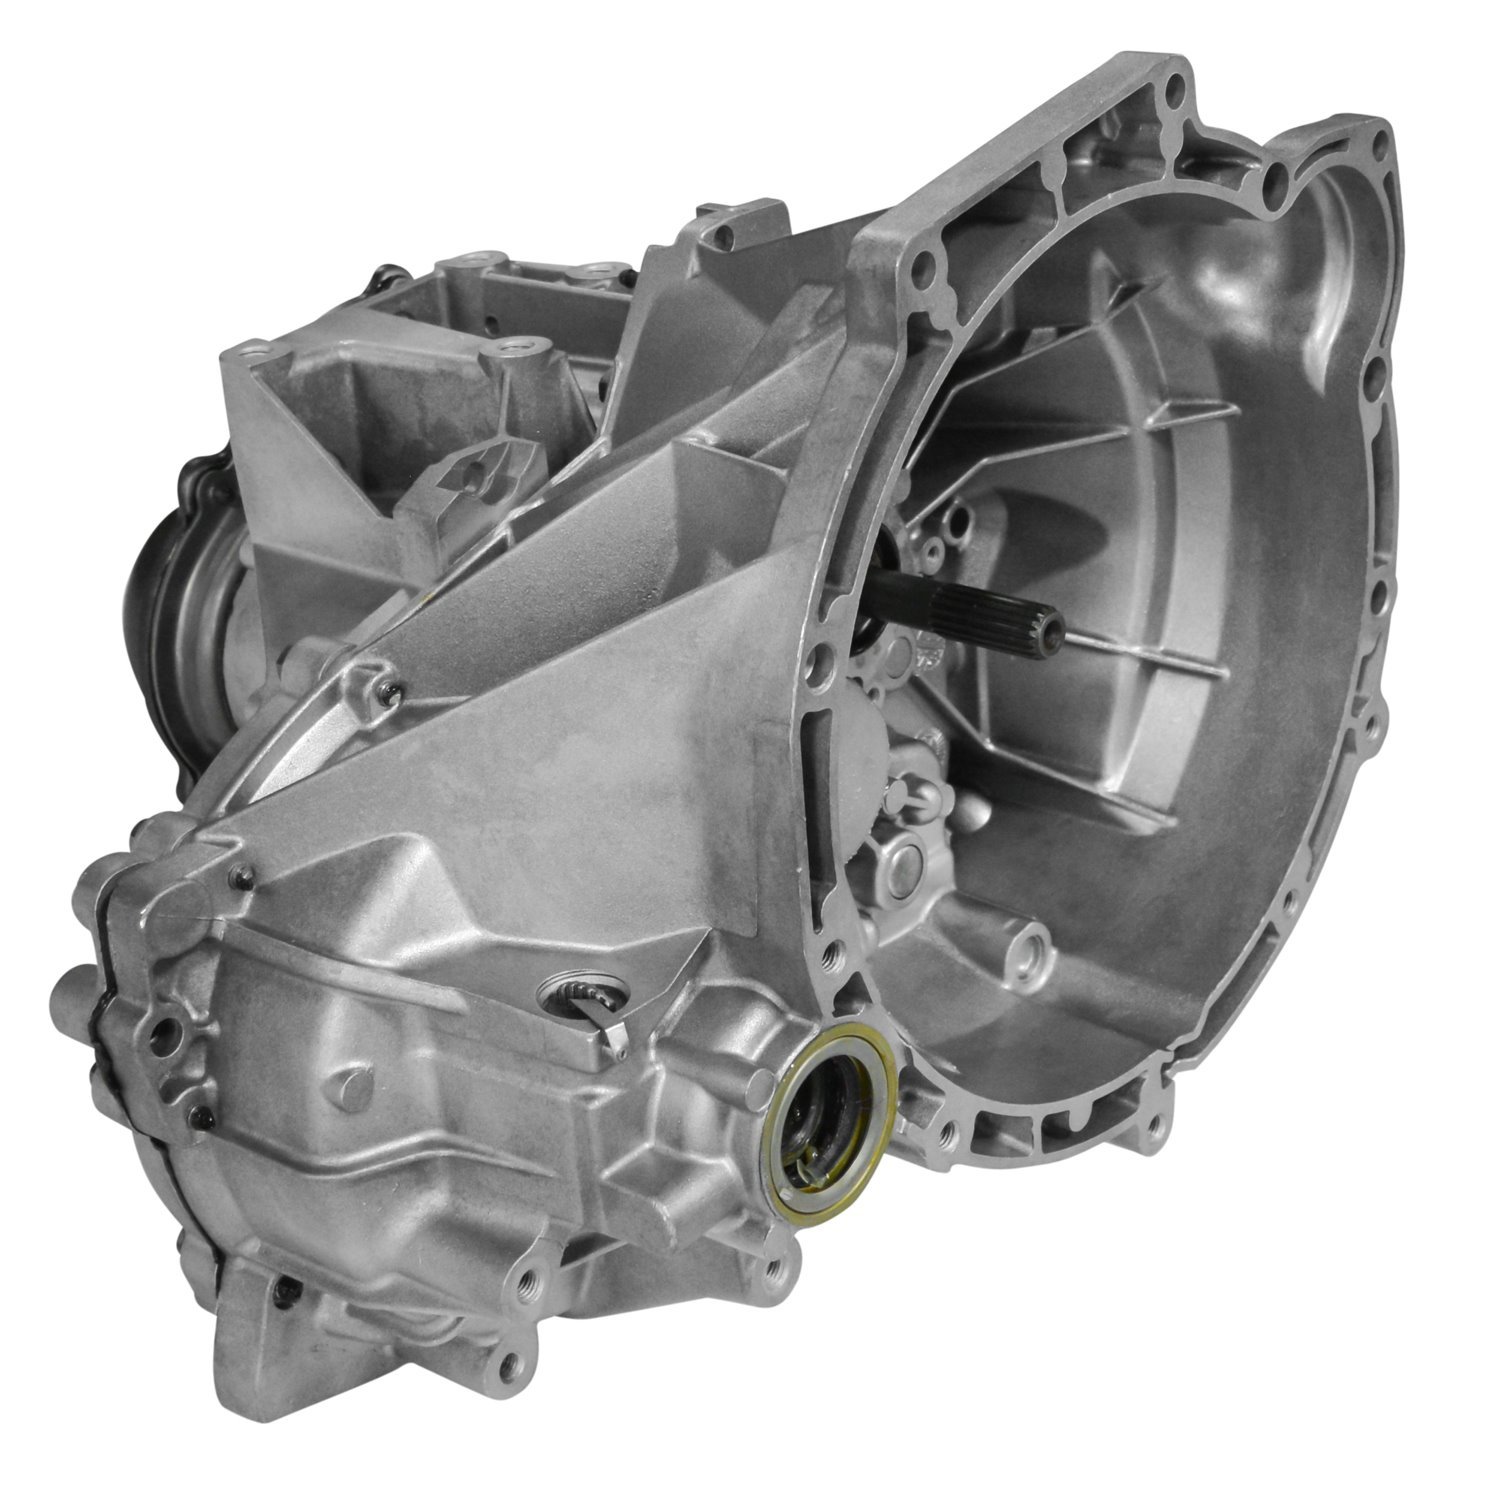 Remanufactured 5-Speed Manual Transmission for 2011-2015 Ford Fiesta with 1.6L Engine